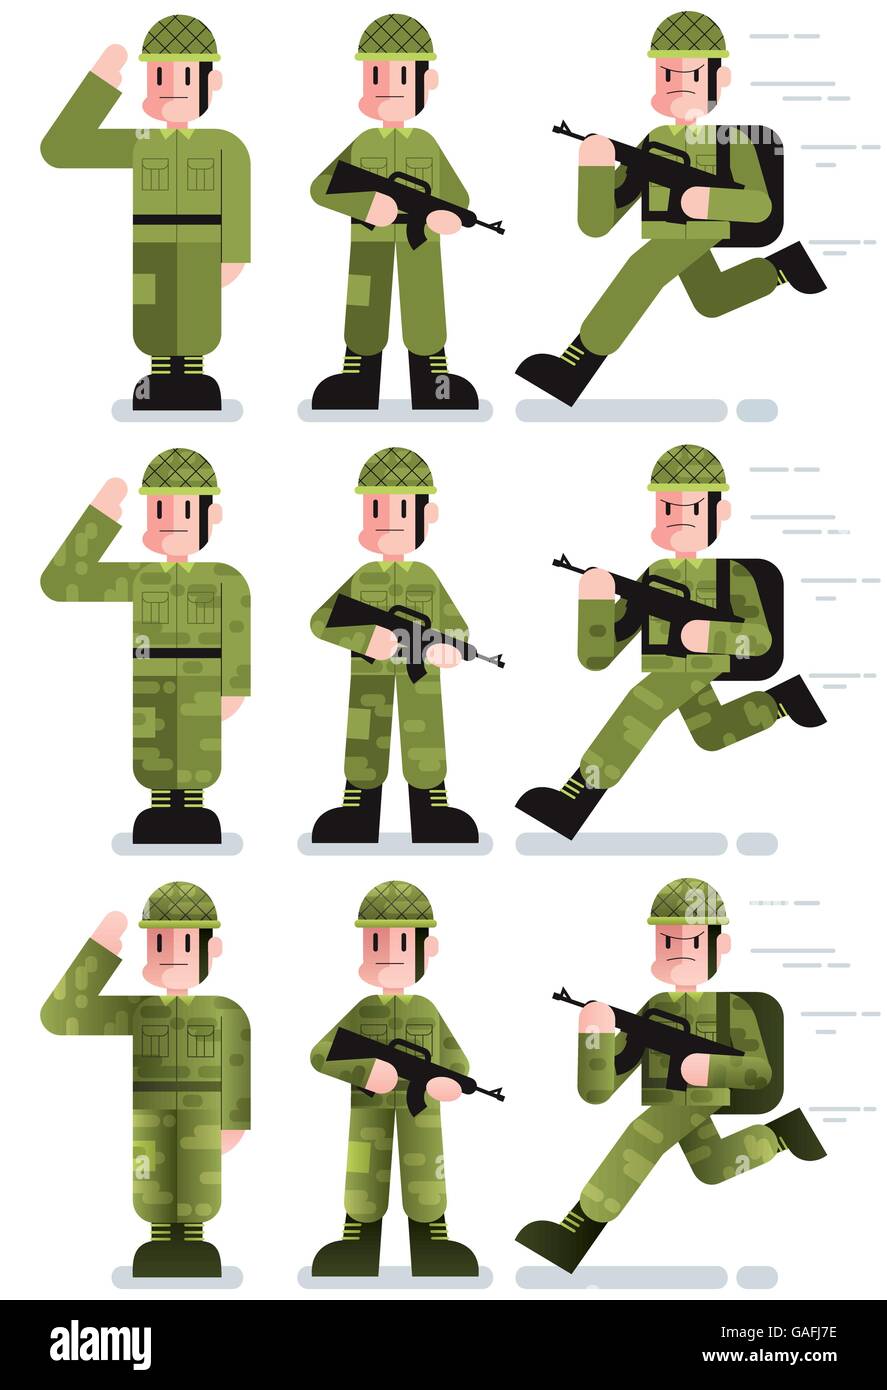 Flat design illustration of soldier in 3 poses and 3 color versions. Stock Vector